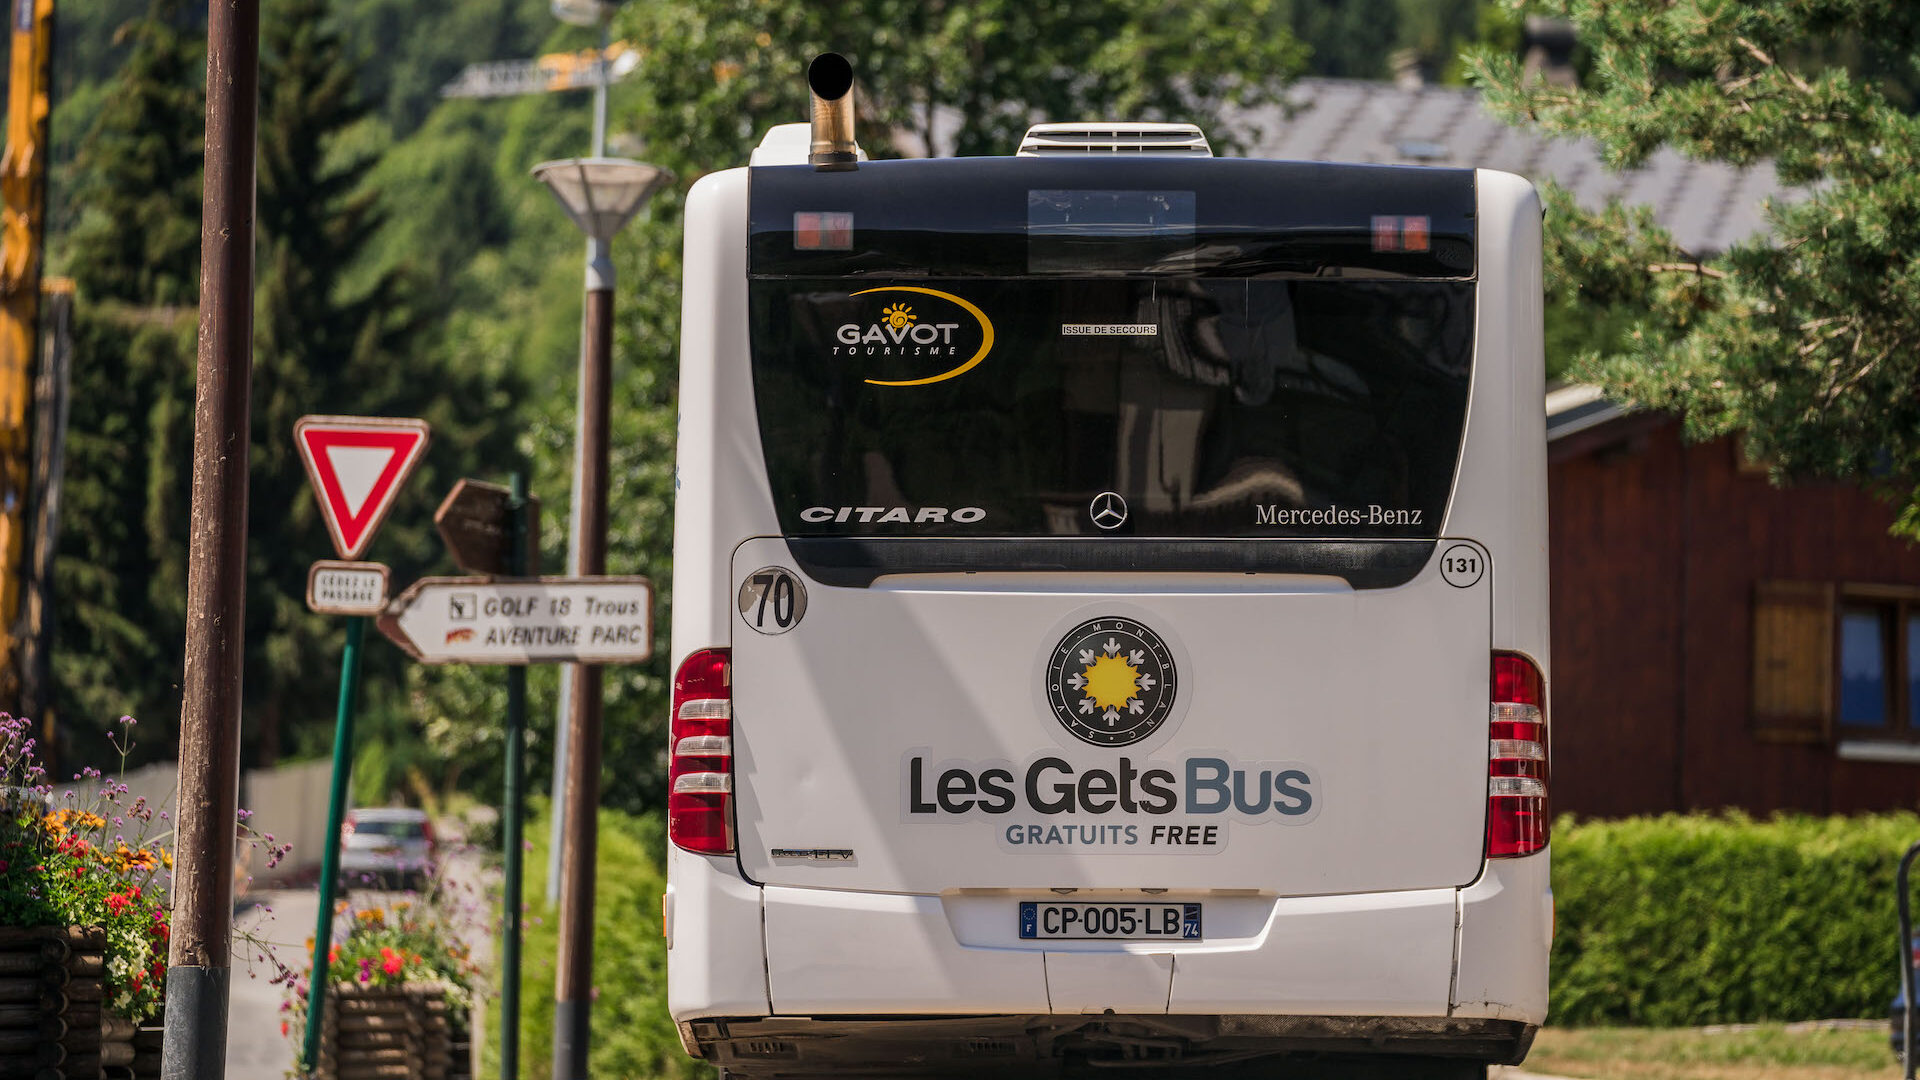 Free shuttle driving in Les Gets village